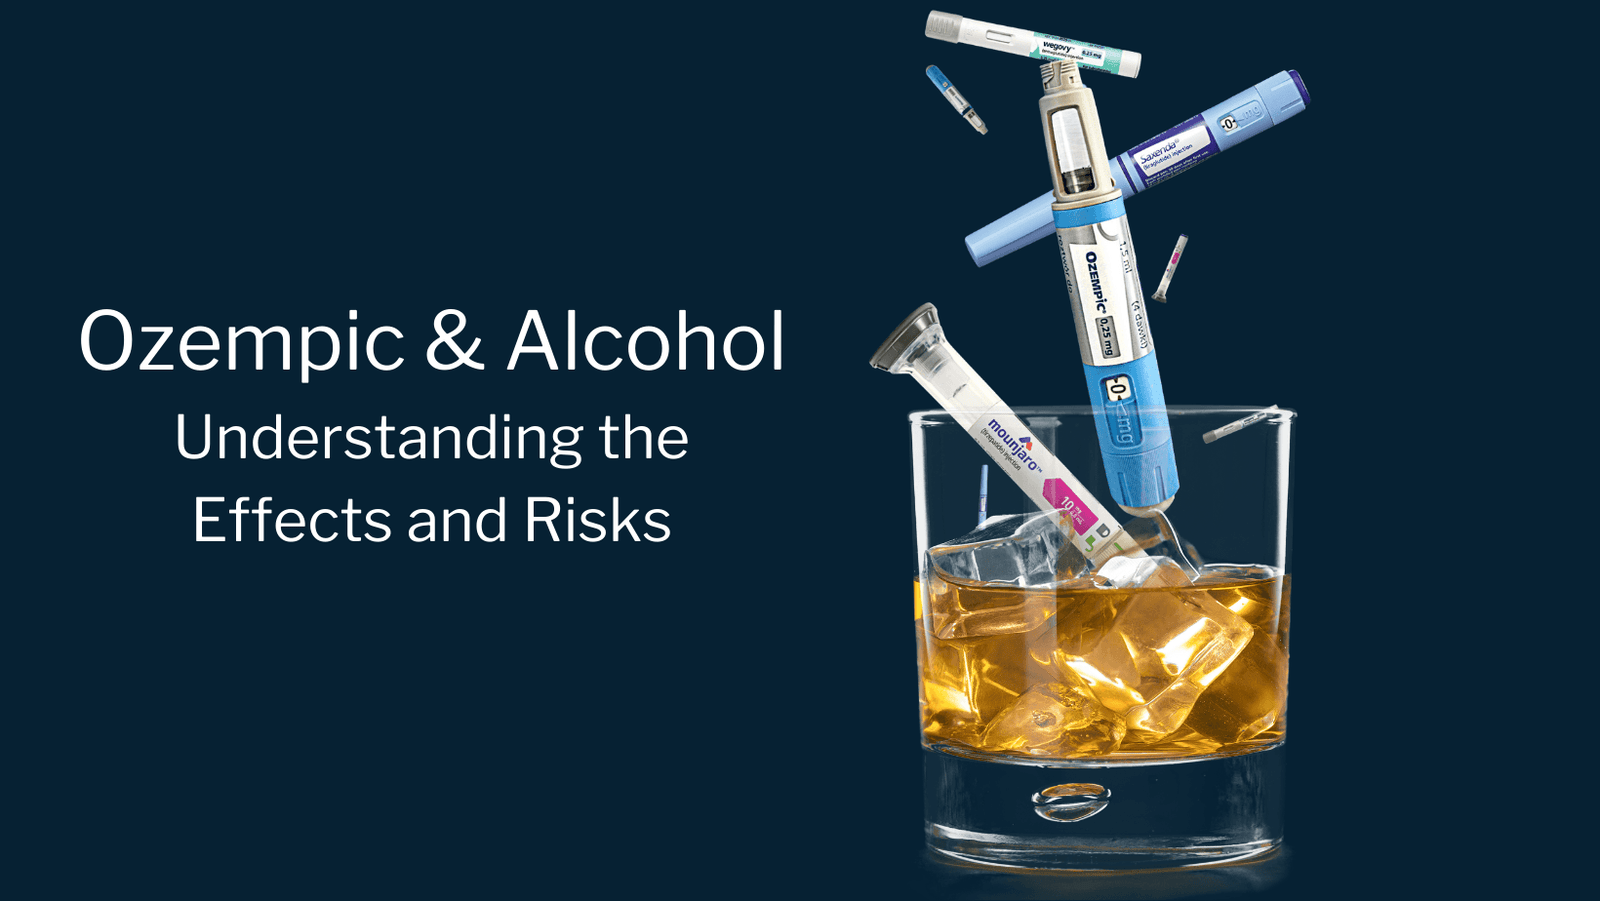 Ozempic and Alcohol: Understanding the Safety and Risks for Type 2 Diabetics - BioCoach